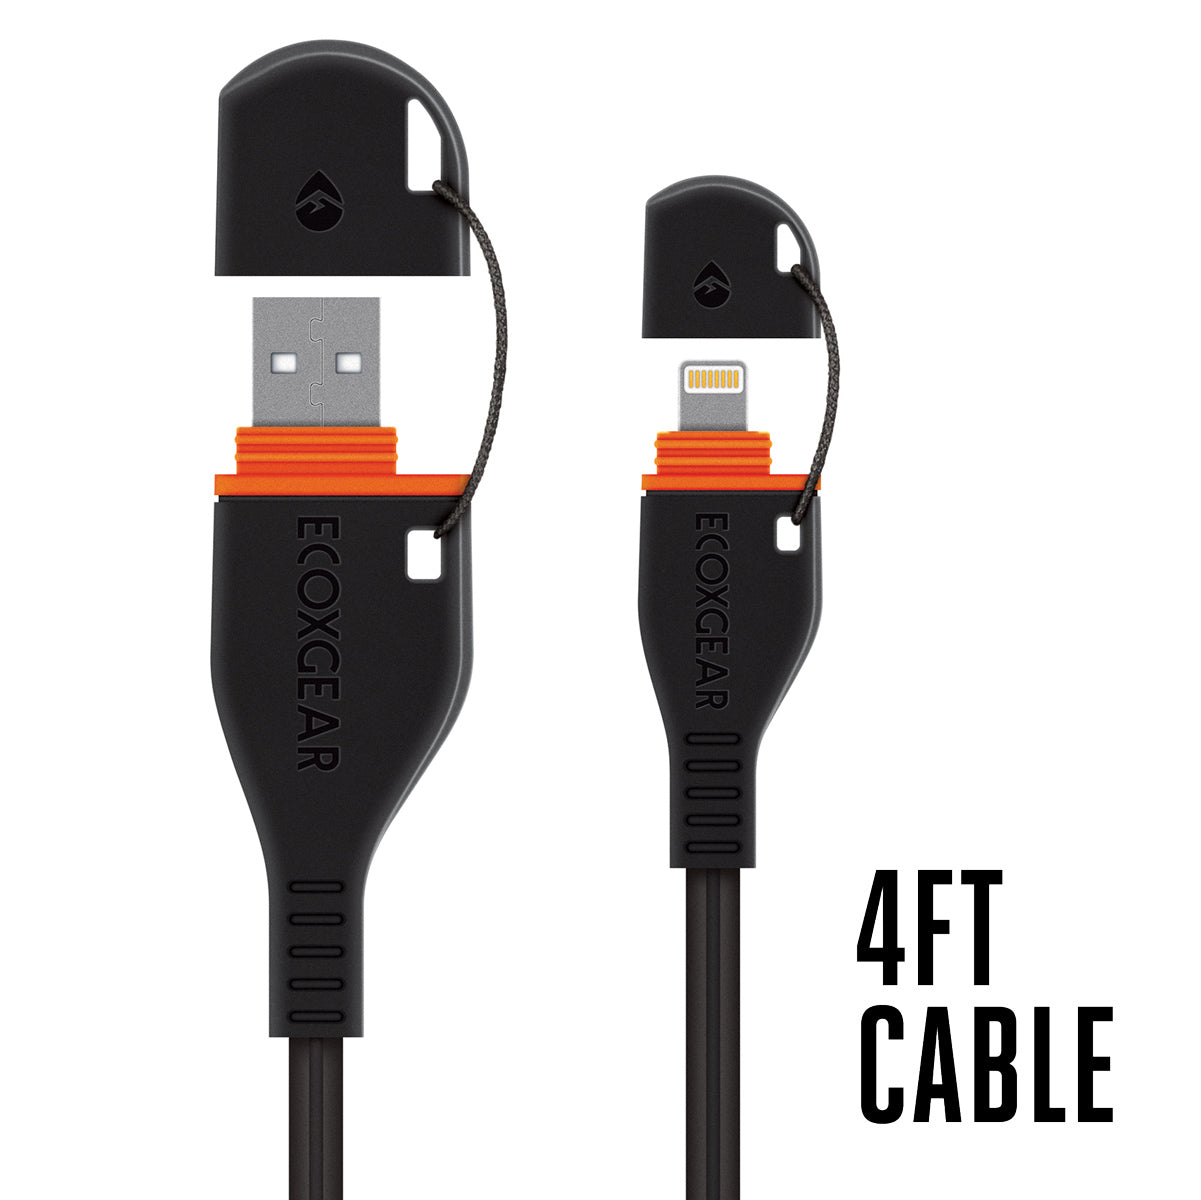 4ft Waterproof USB Cable – ECOXGEAR